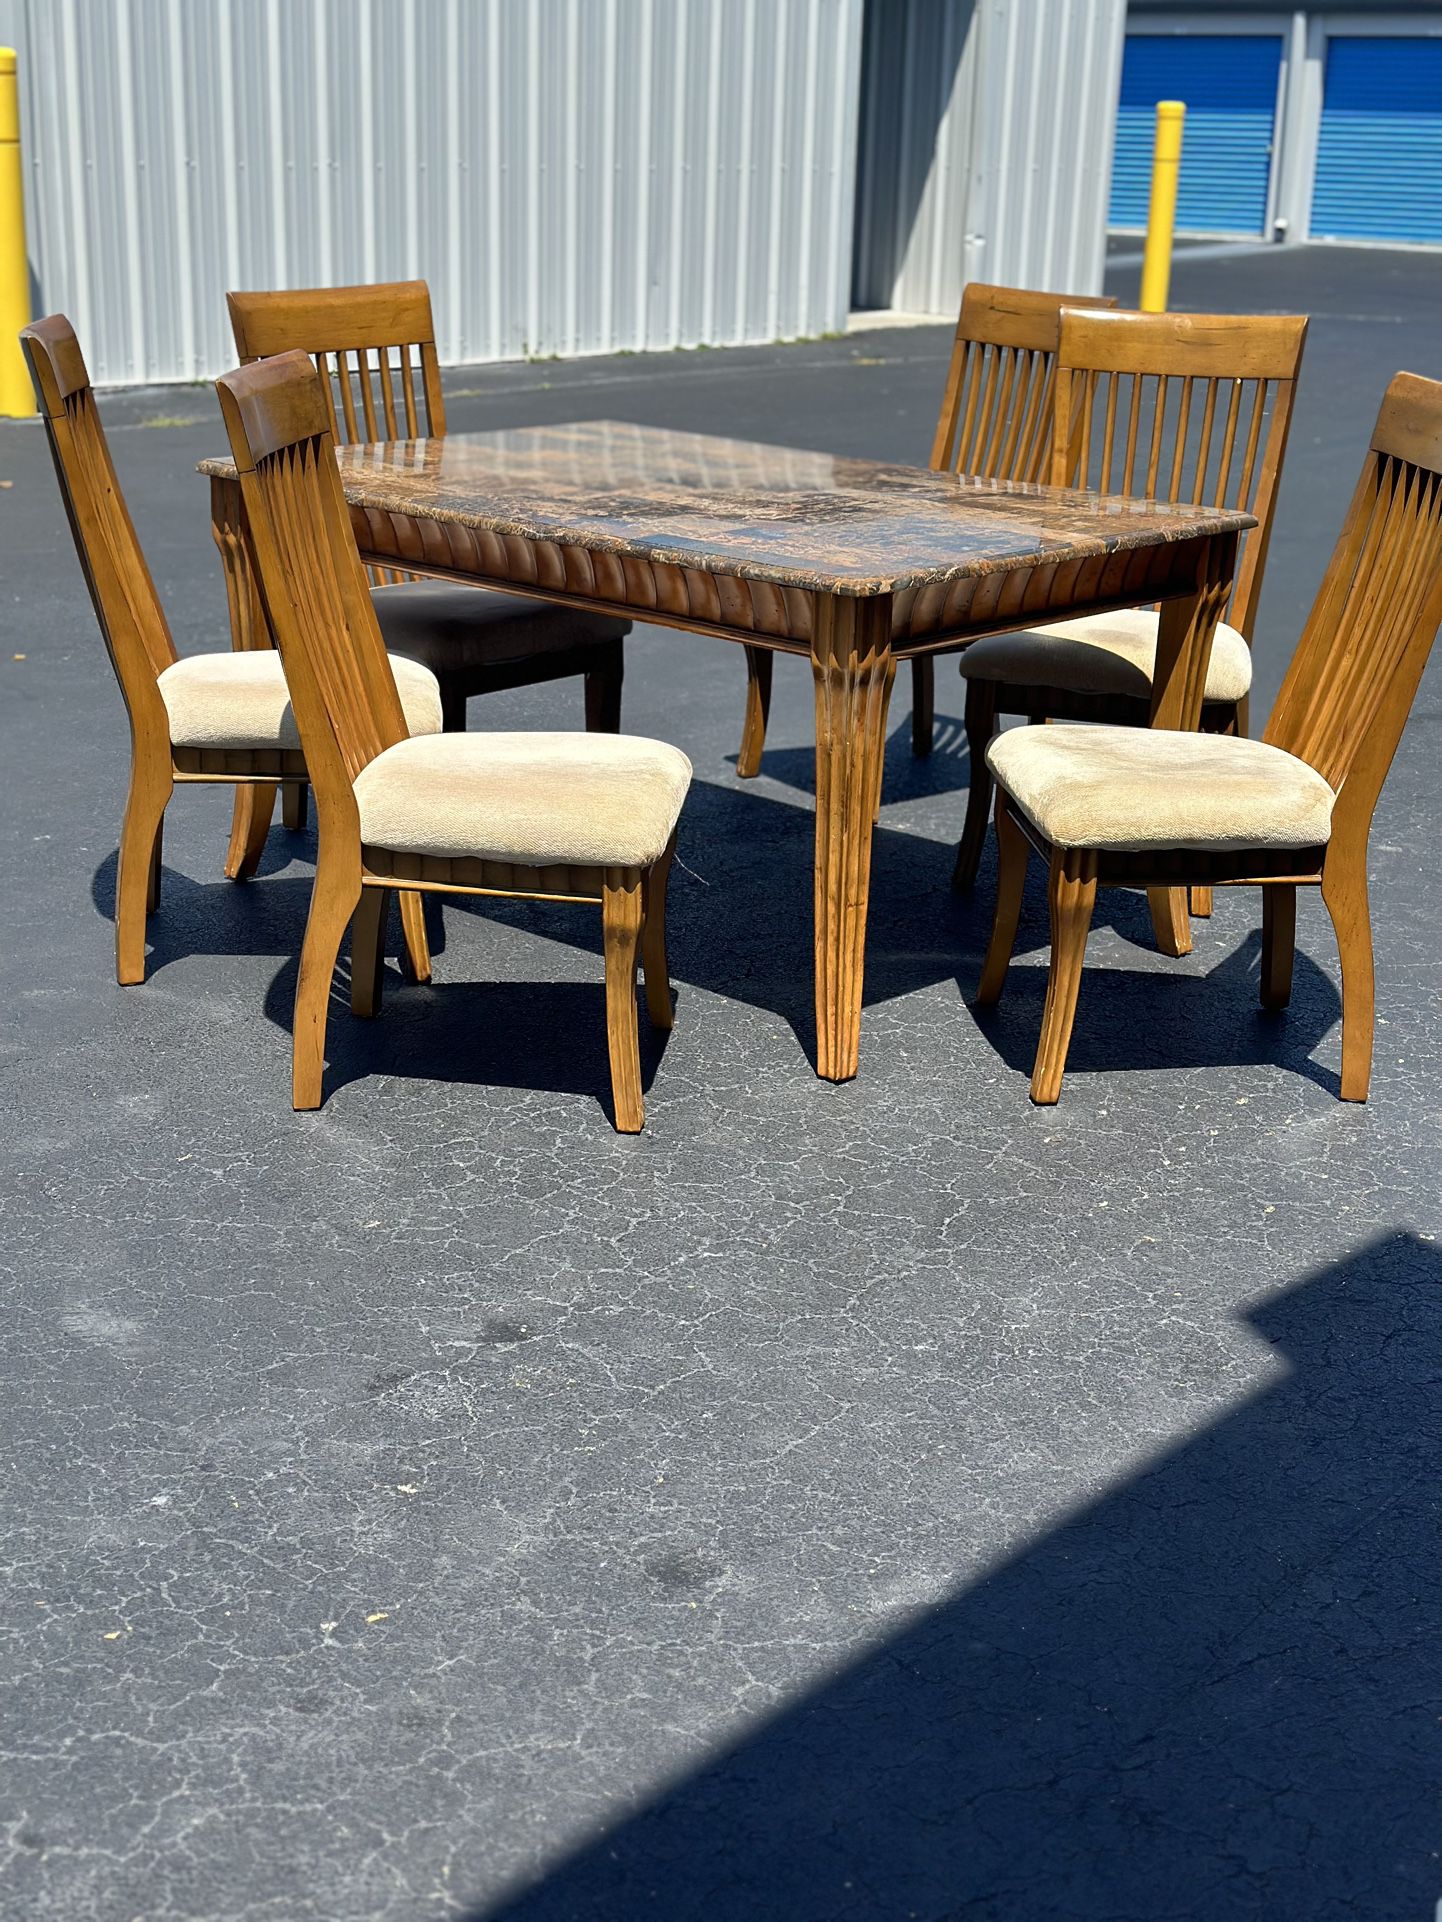 6 Chairs dining table 